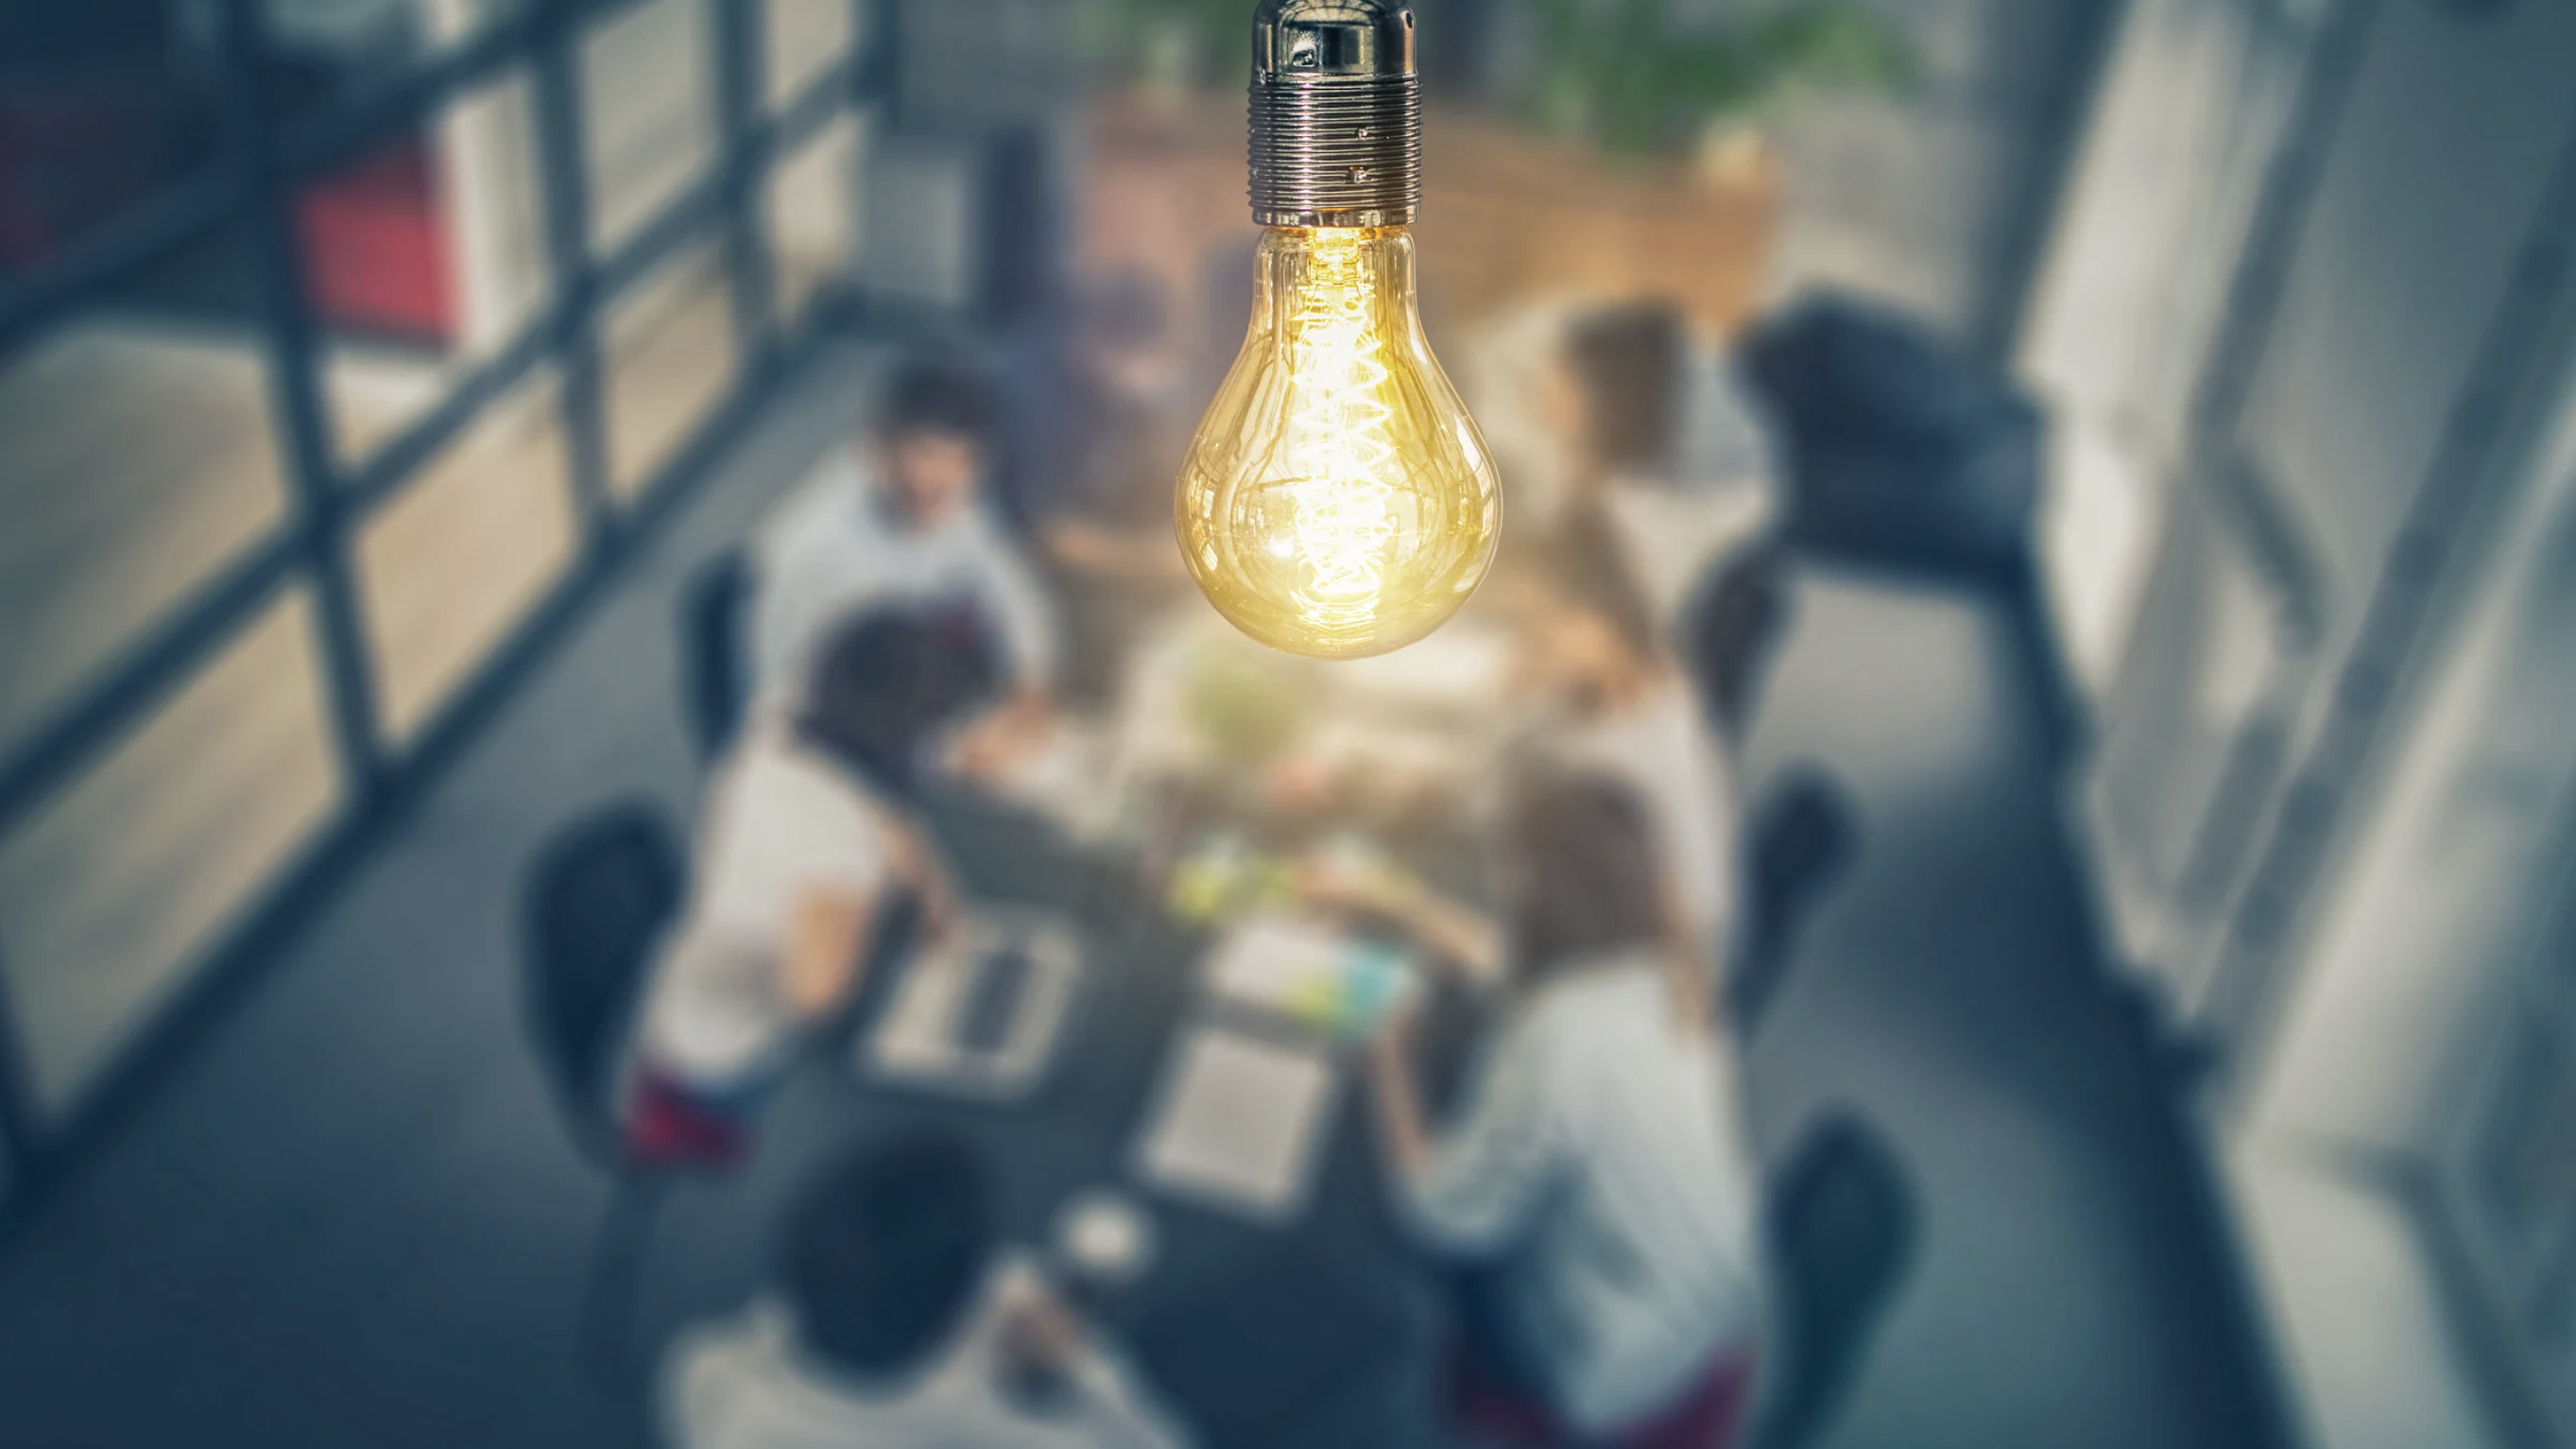 Top-down view of a dynamic business meeting with six participants. The surroundings are intentionally blurred, drawing attention to a vibrant yellow light bulb emitting a brilliant beam of light.